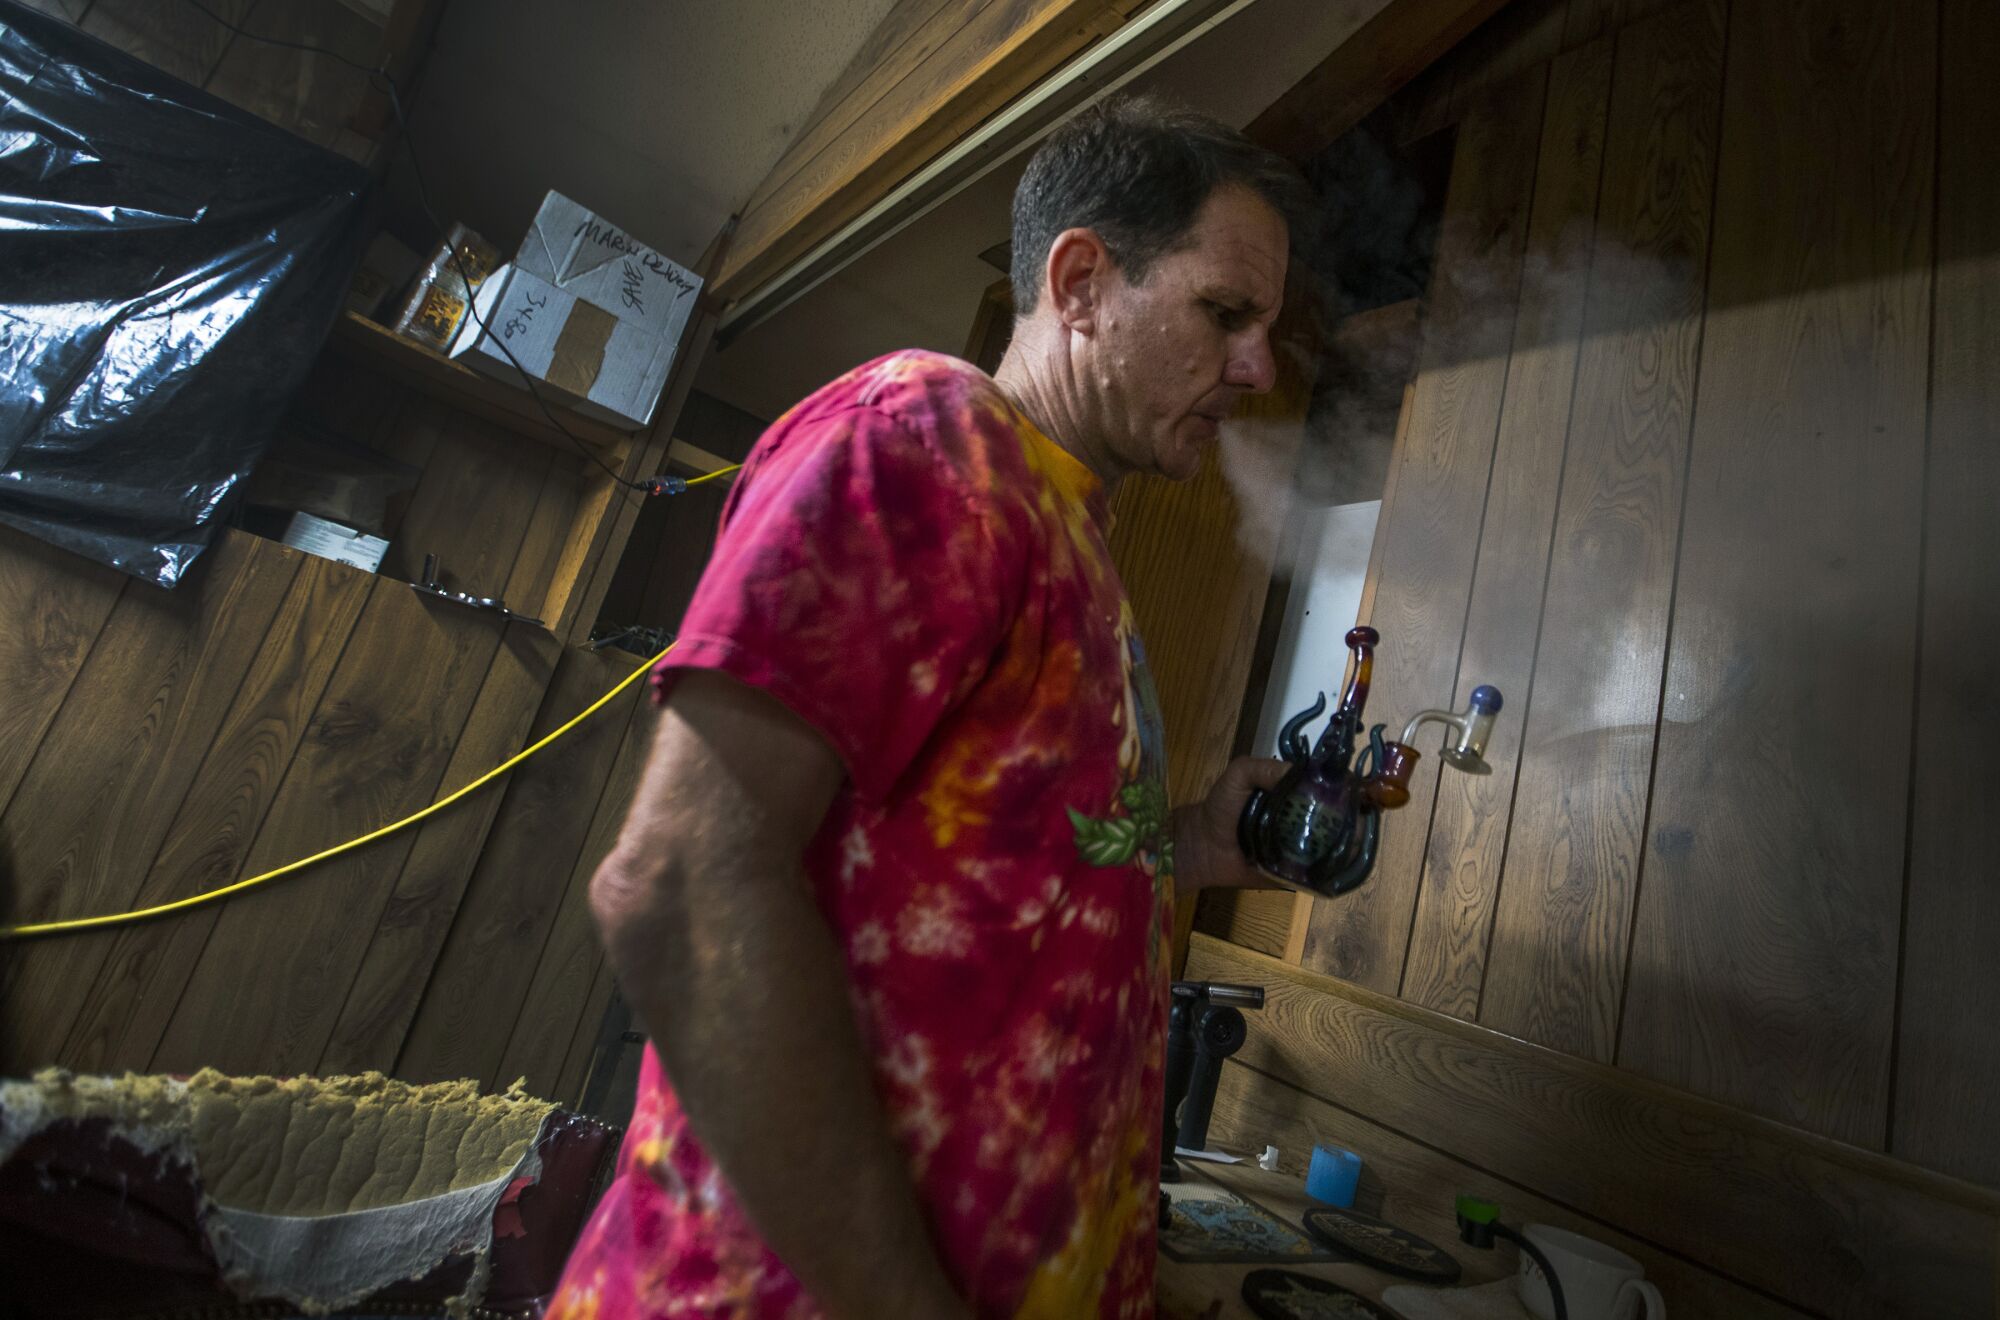 Terry Mines, wearing a tie-dye shirt, takes a hit from a water pipe